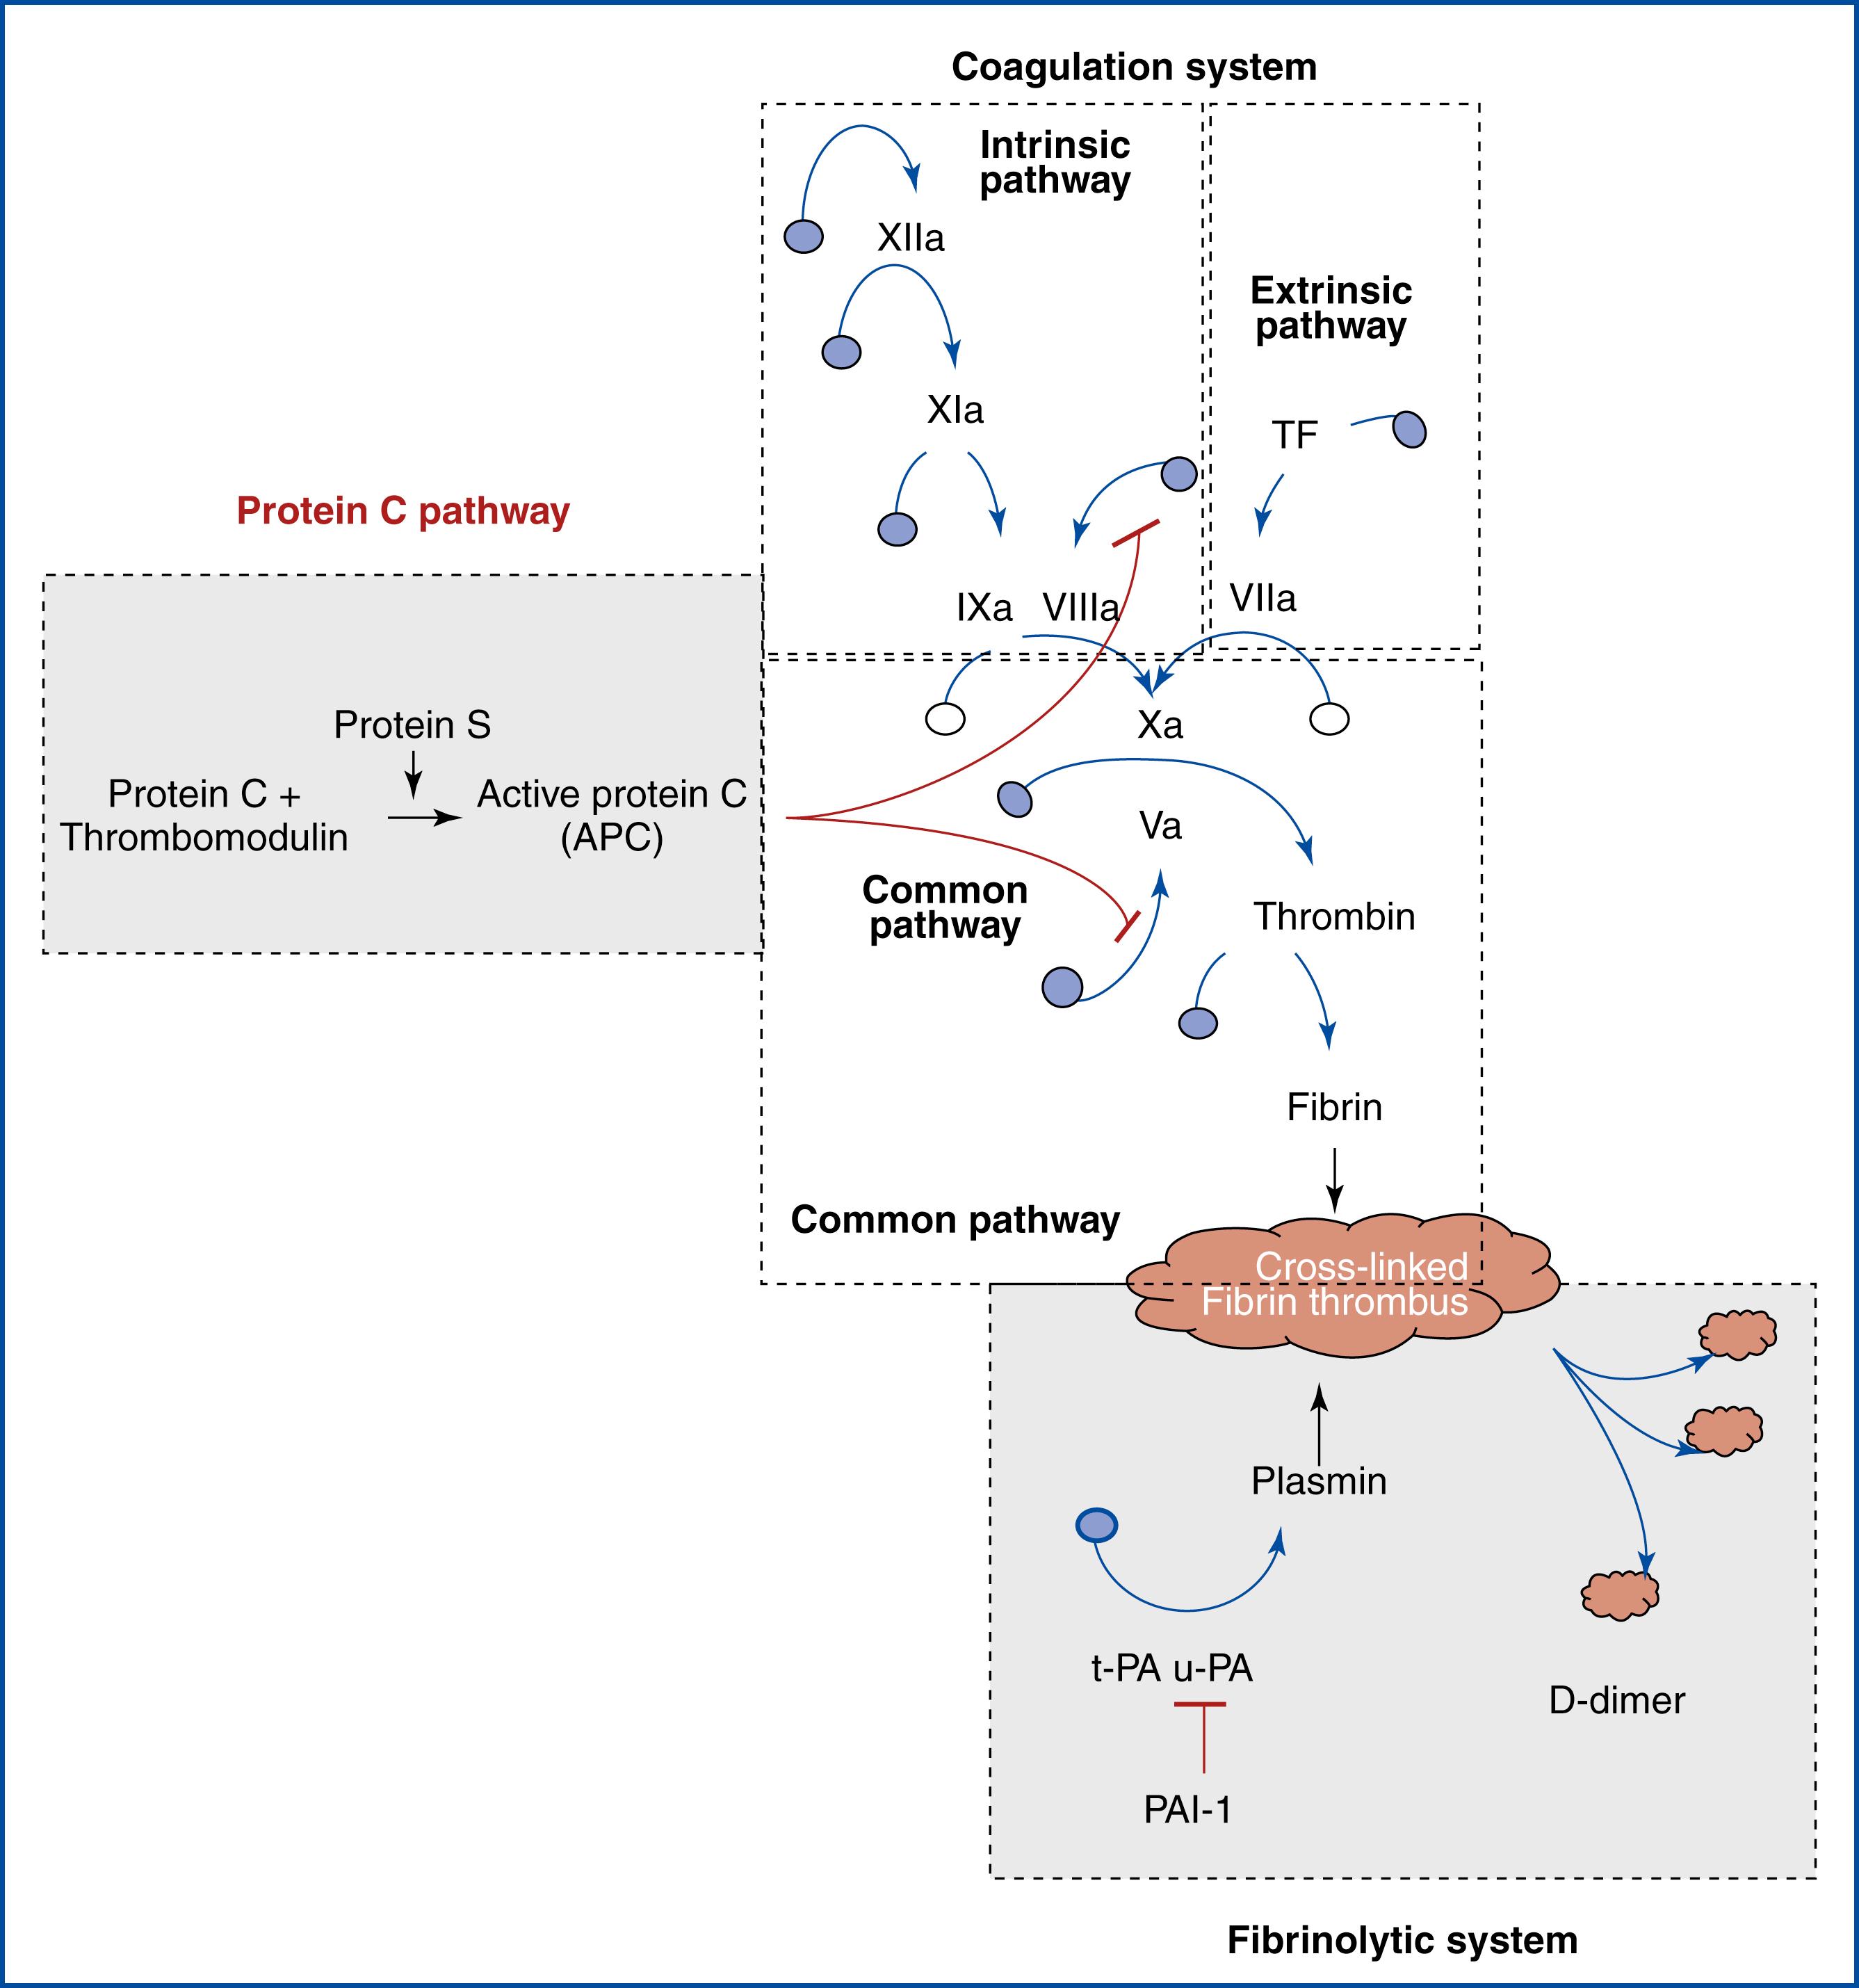 Figure 9.1, Integrated representation of the coagulation cascade and the main players for the intrinsic, extrinsic and common pathways, the natural anticoagulant protein C pathway and the fibrinolytic system with the degradation product D-dimer. PAI-1, plasminogen activator inhibitor-1; TF, tissue factor; tPA , tissue plasminogen activator; uPA , urokinase-type plasminogen activator.